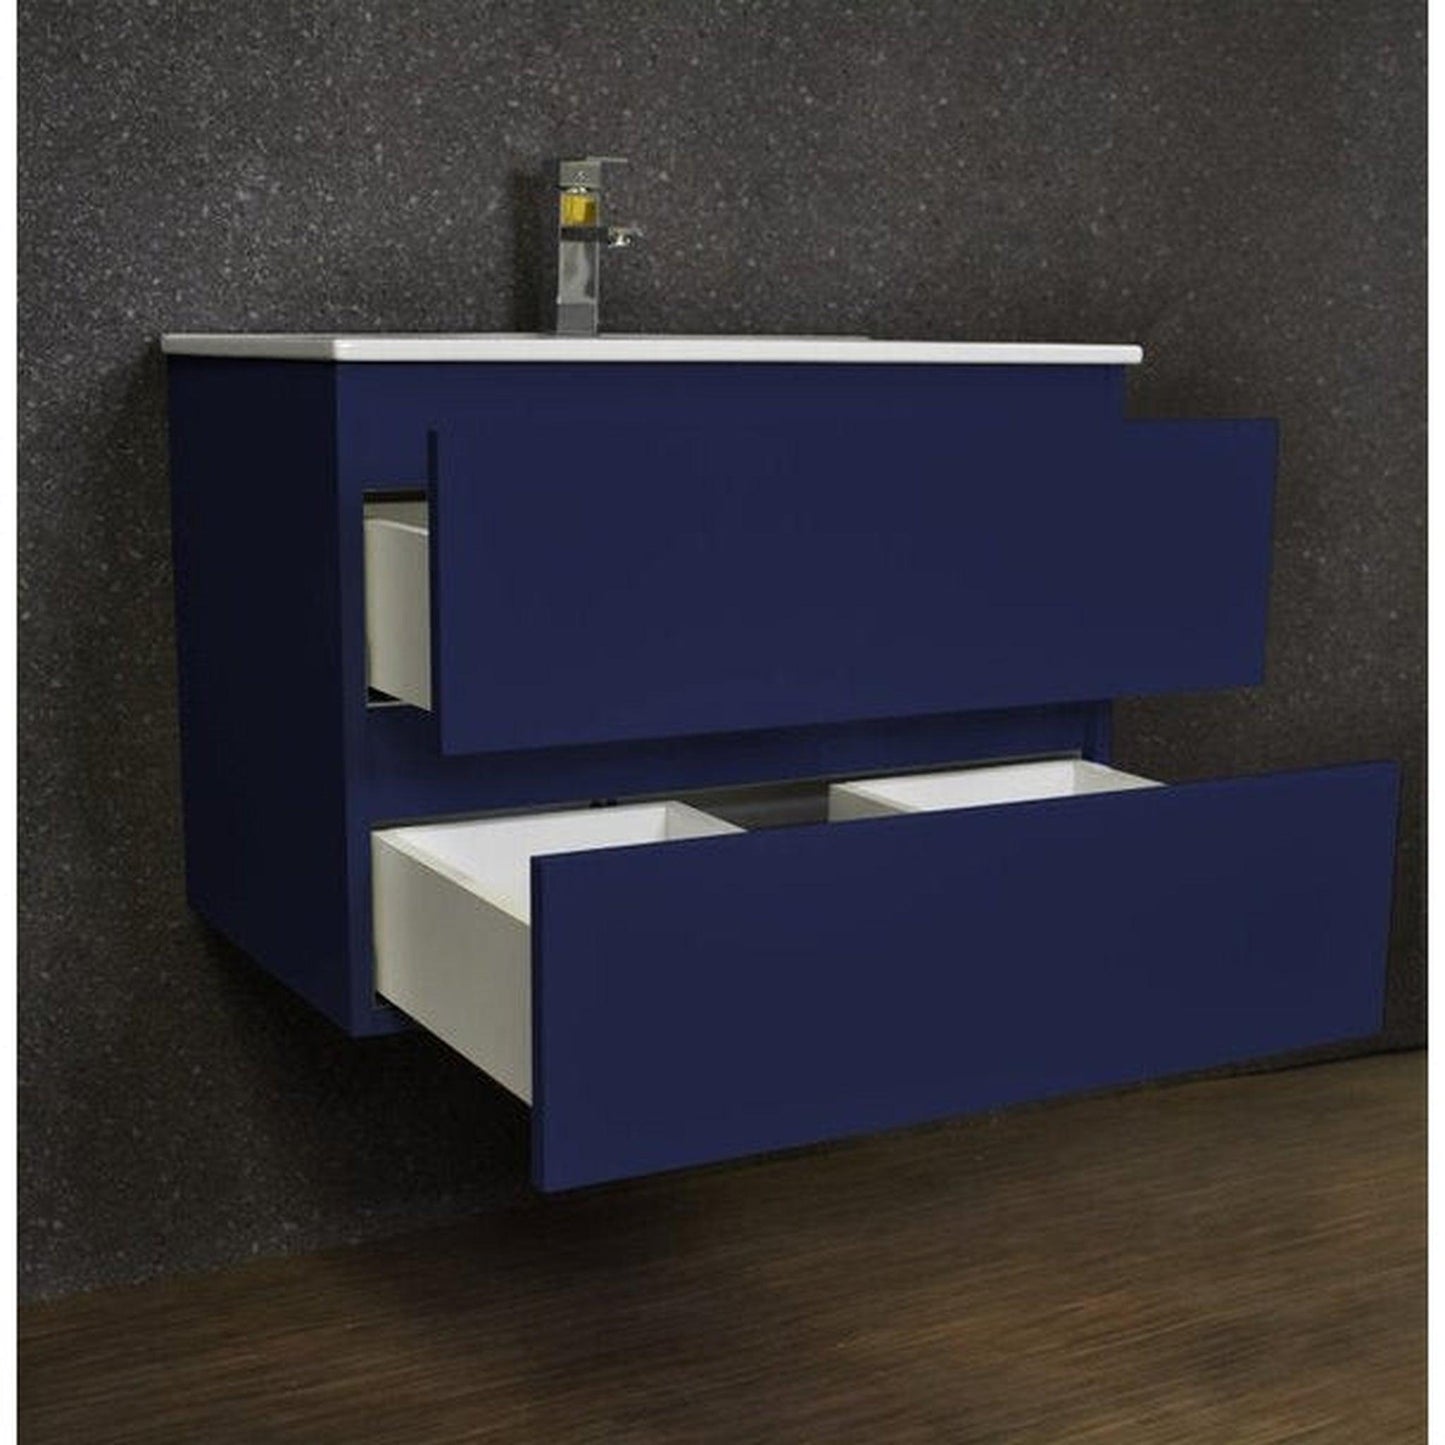 Volpa USA Salt 30" x 18" Navy Wall-Mounted Floating Bathroom Vanity With Drawers, Integrated Porcelain Ceramic Top and Integrated Ceramic Sink